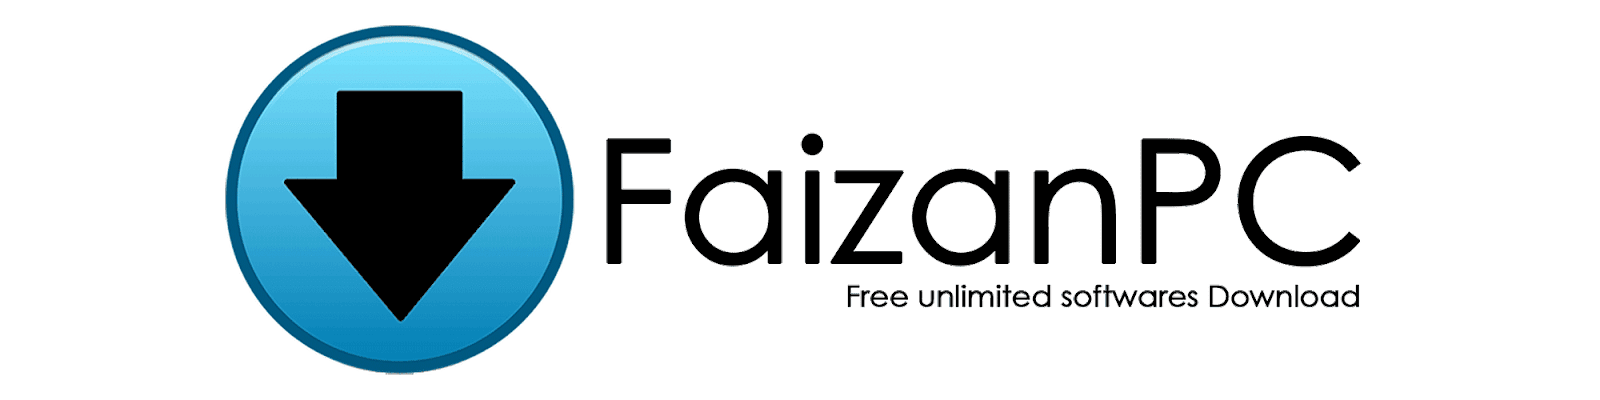 Download Free Unlimited Softwares For Windows PC with Faizanpcsofts